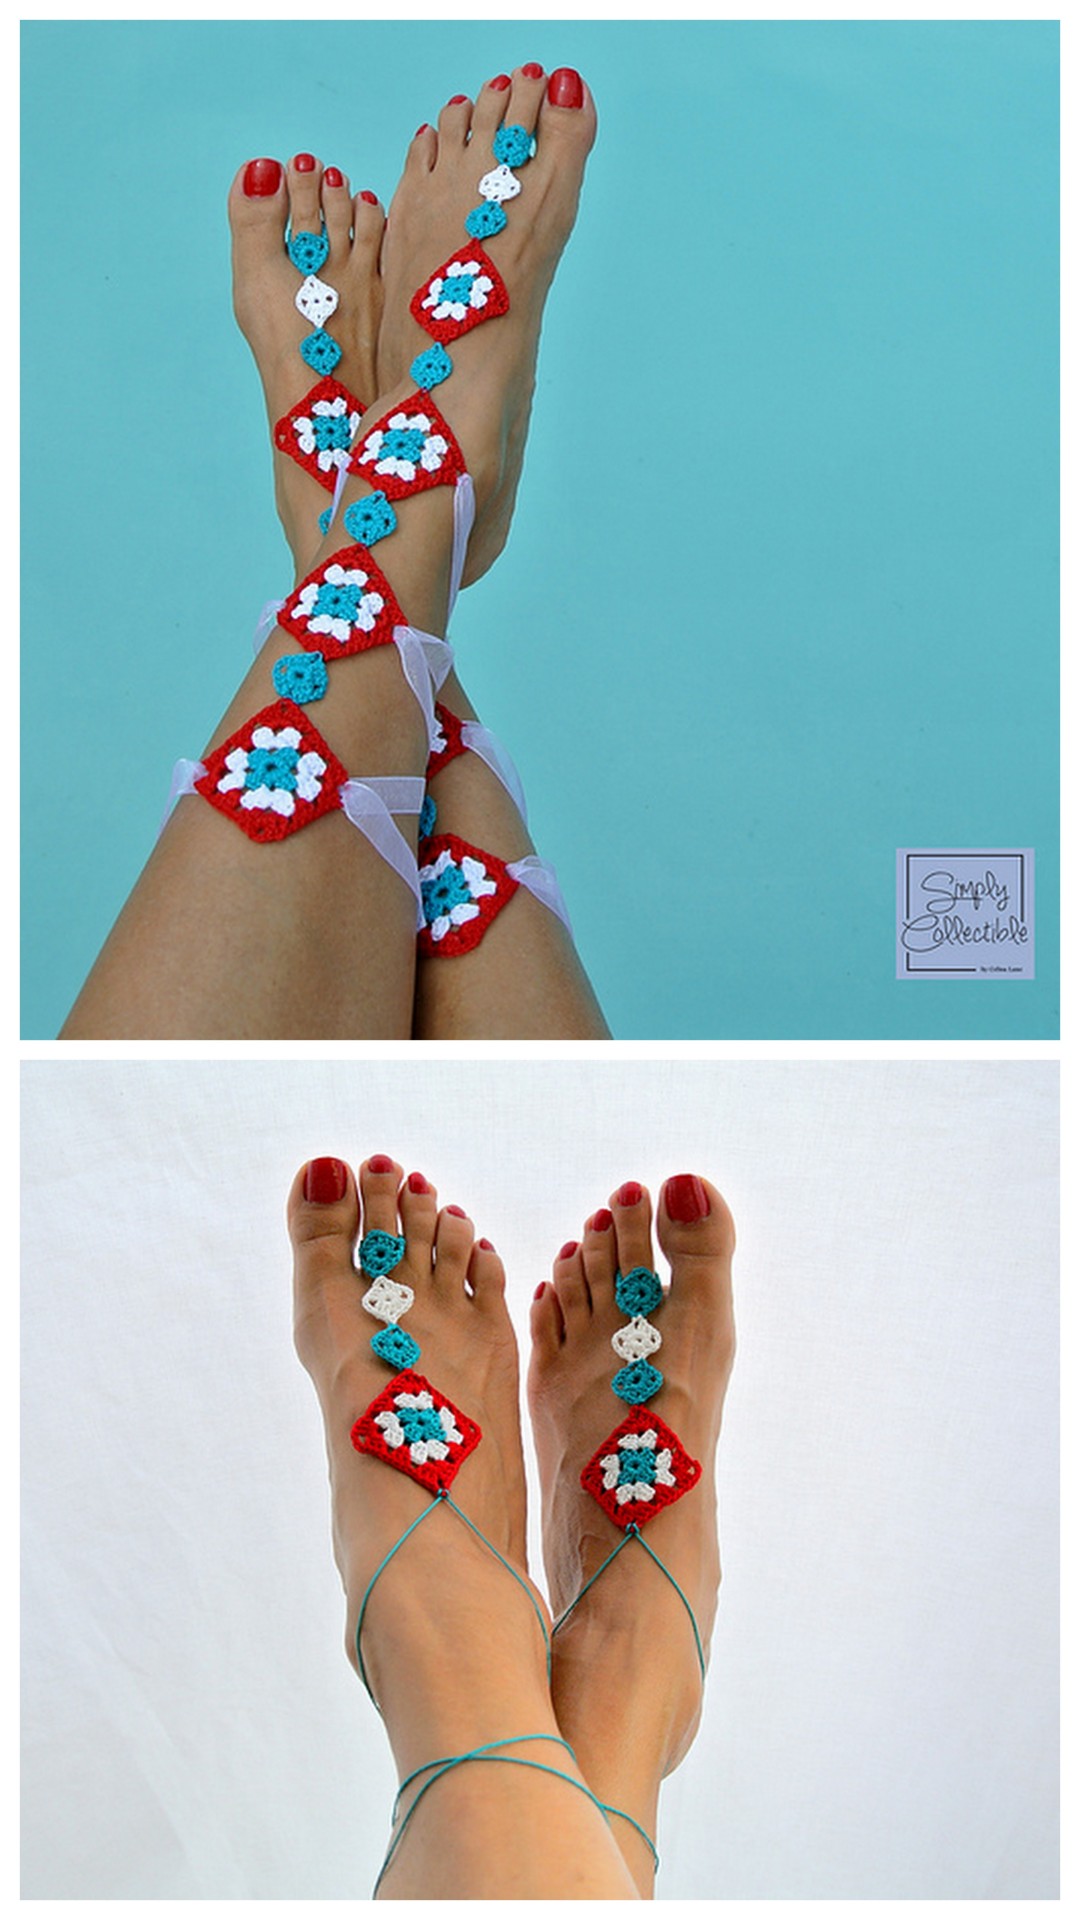 Xero Shoes DIY Sandal Review - Affordable and Easy to Make! | Anya's Reviews